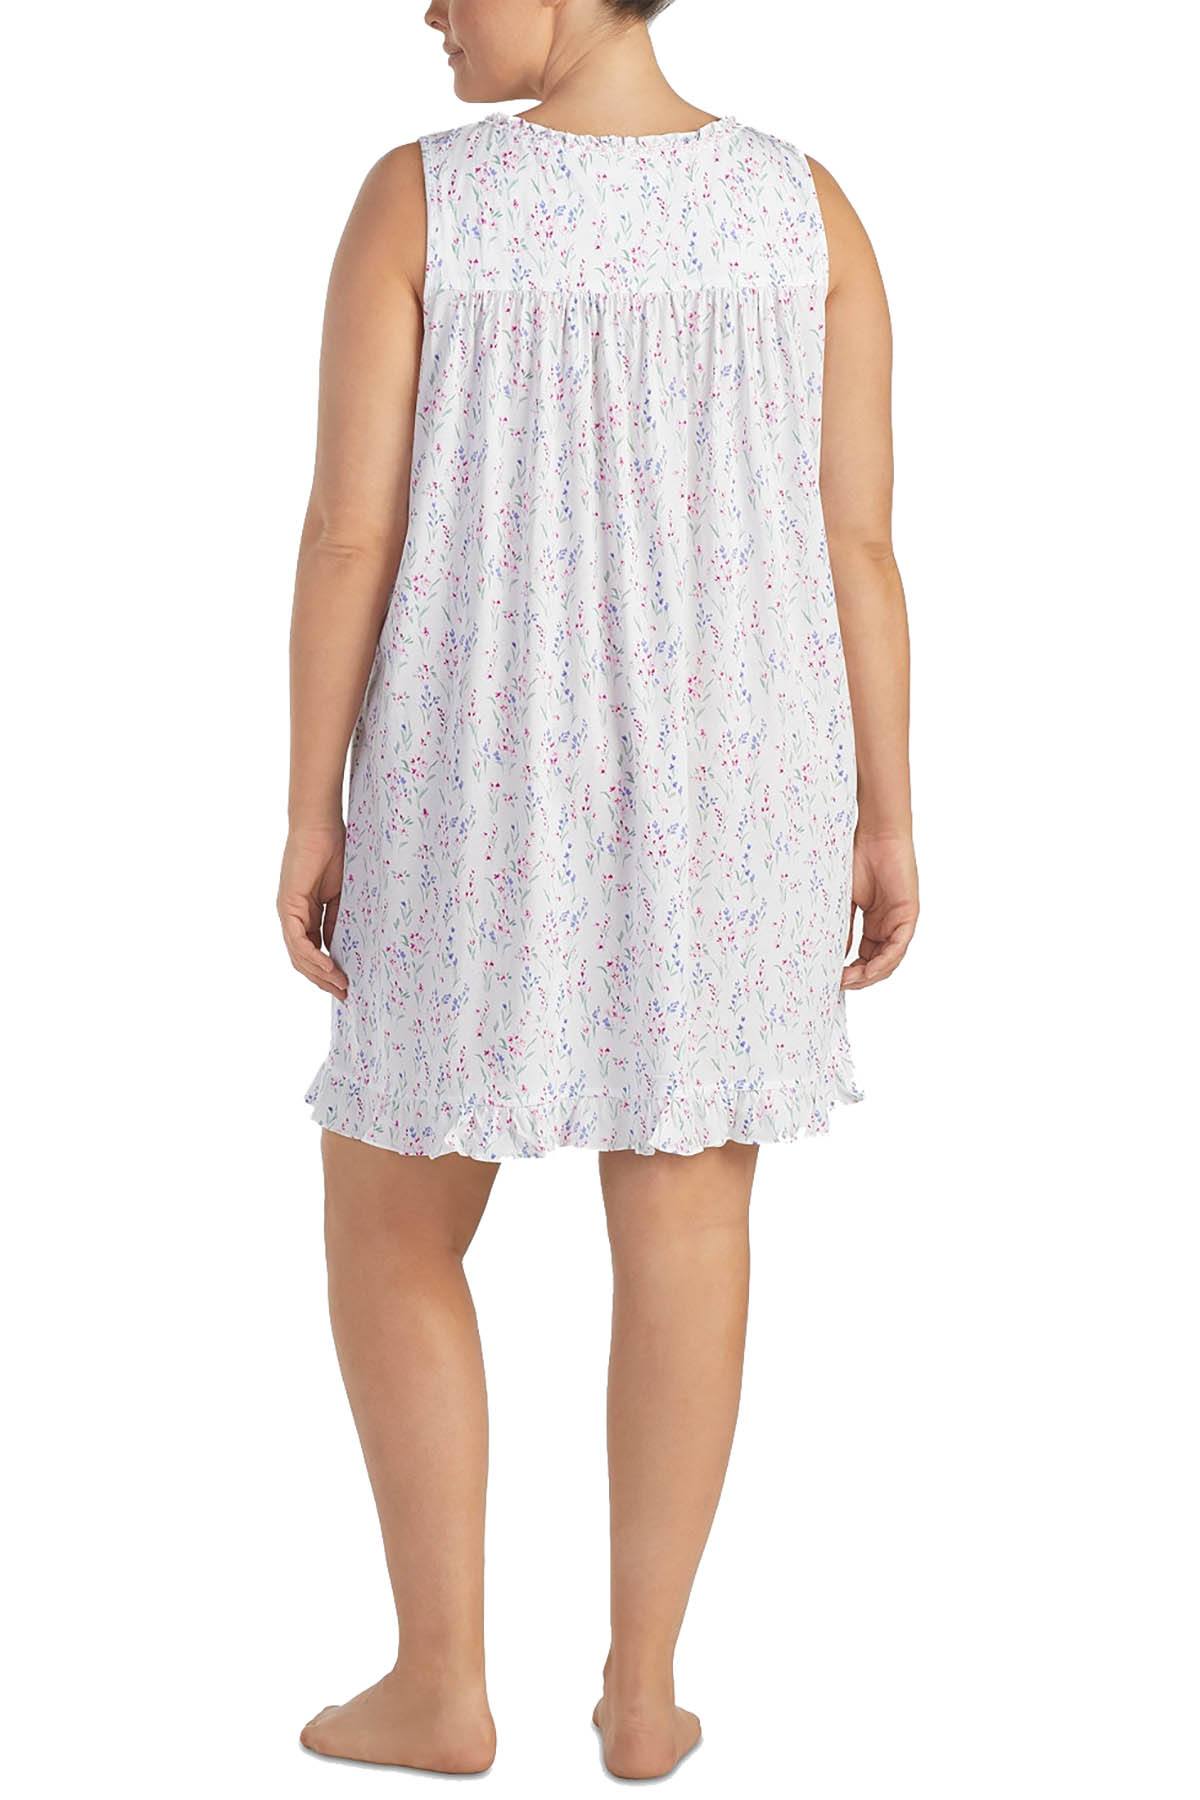 Eileen West PLUS White Floral Ruffled-Trim Knit Chemise